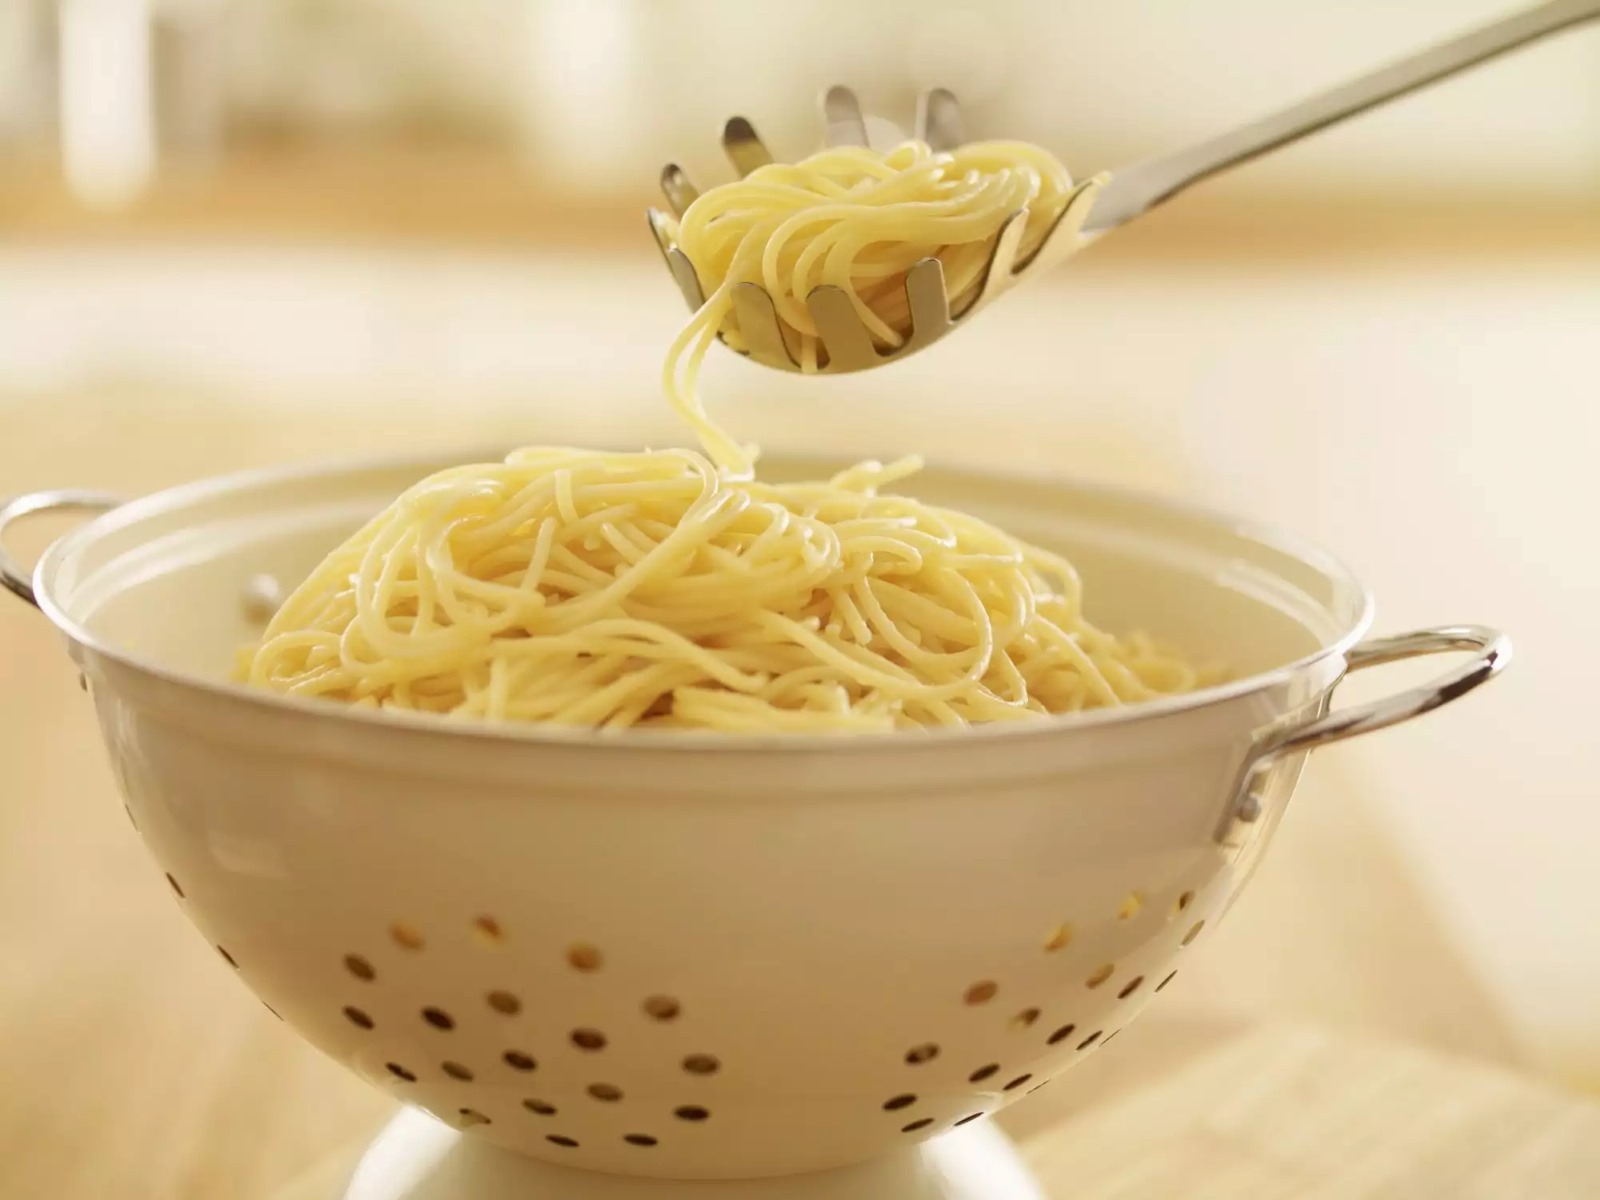 How To Use A Strainer For Pasta